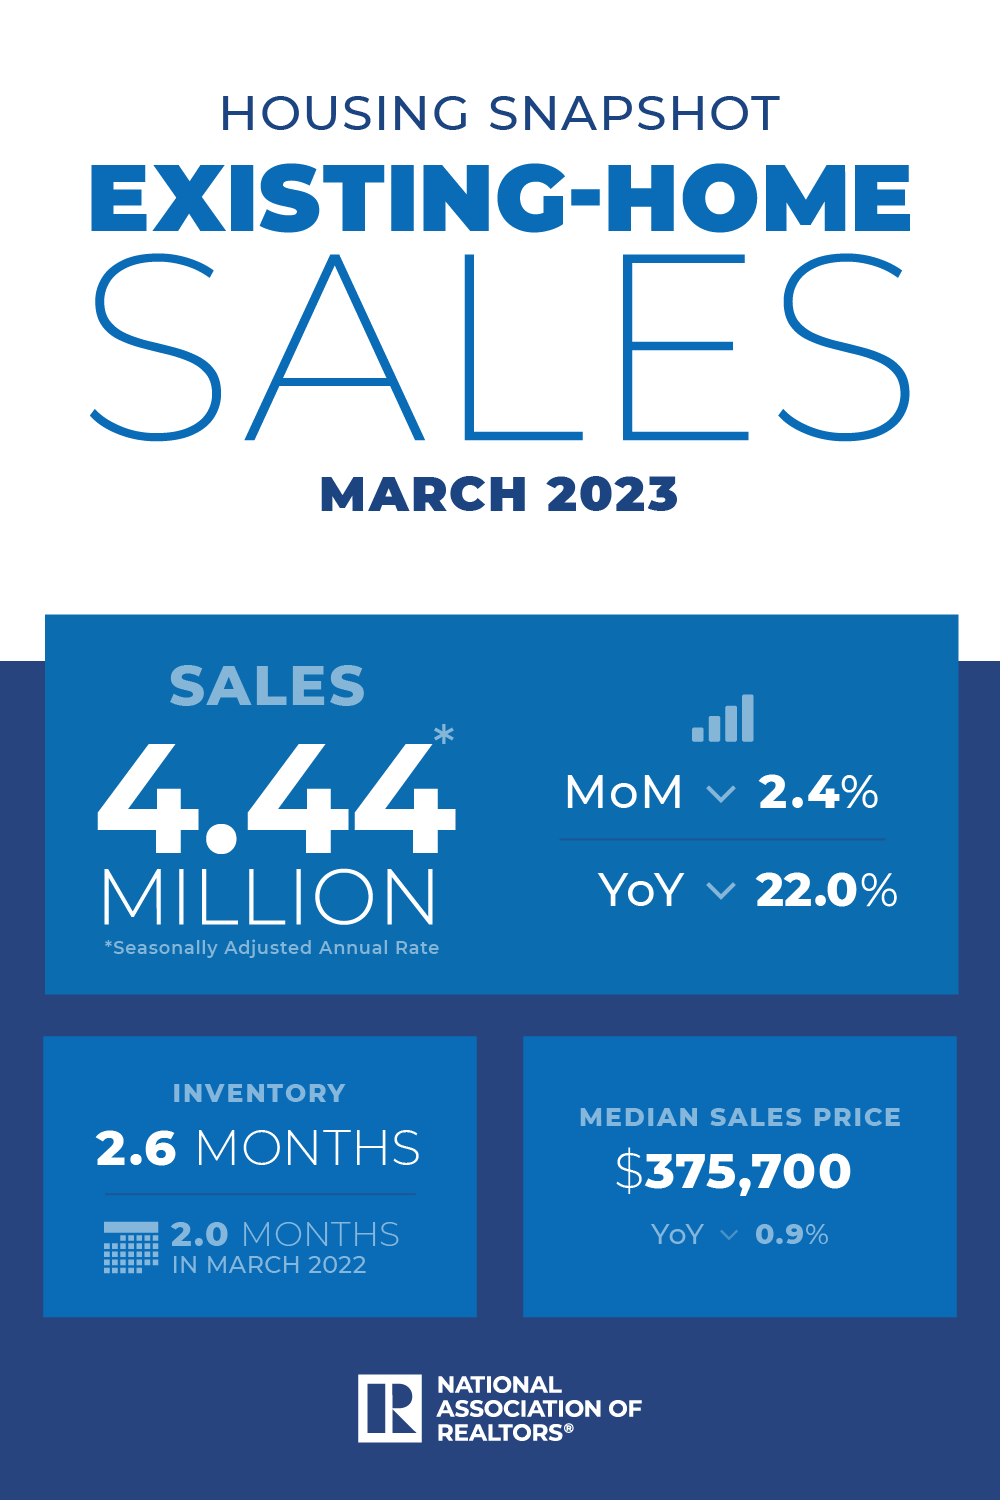 EHS Housing Snapshot Infographic, March 2023